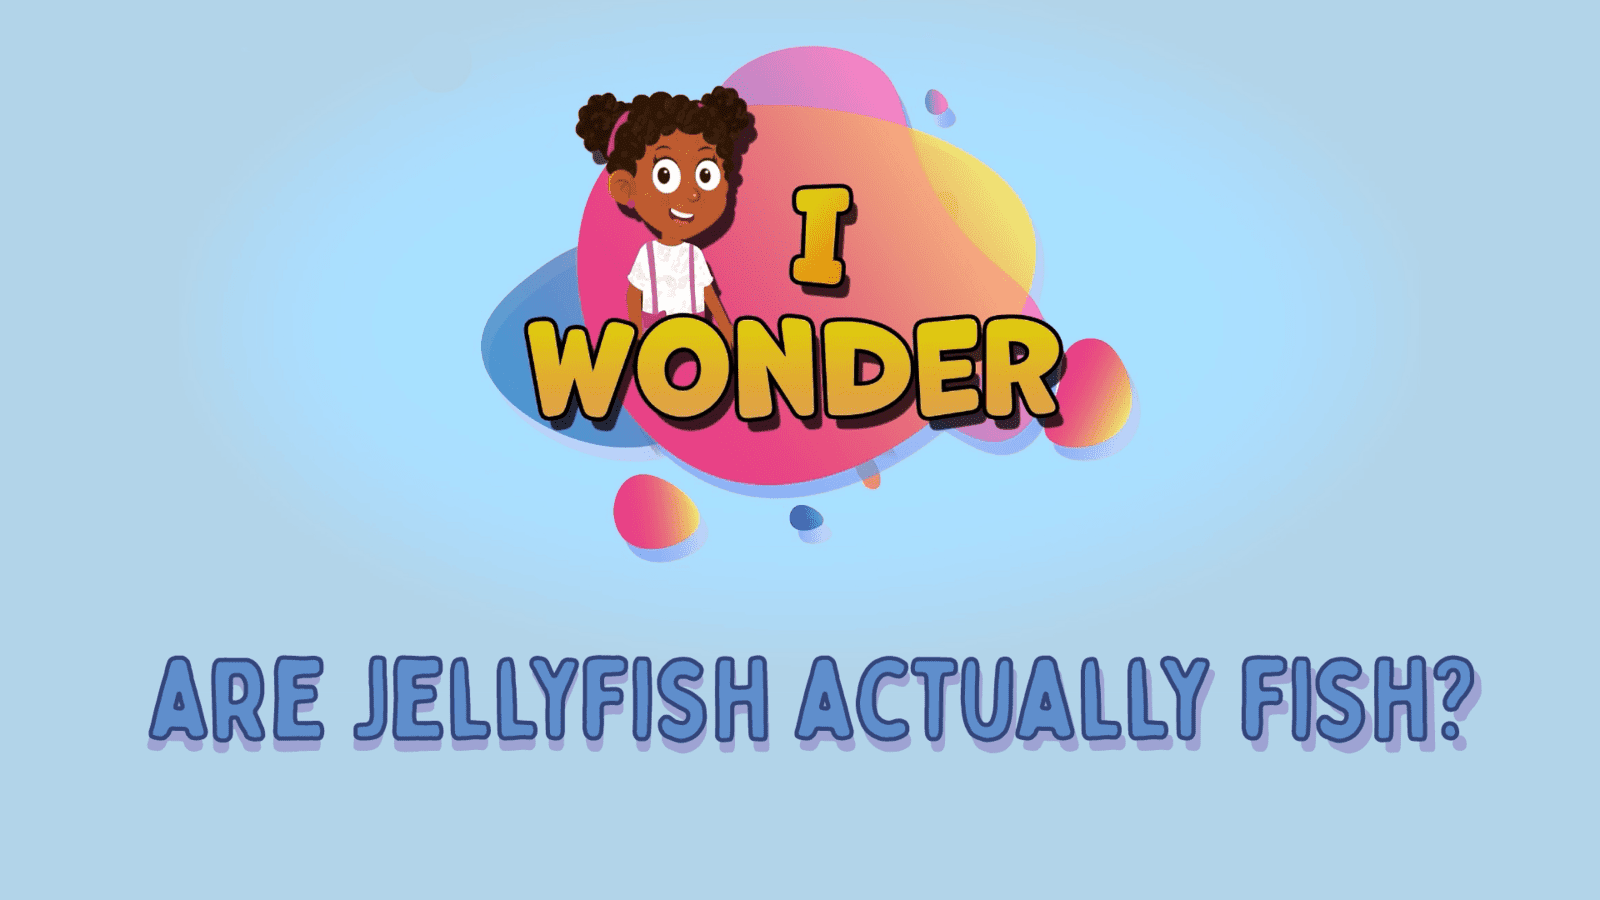 Are Jellyfish Actually Fish?